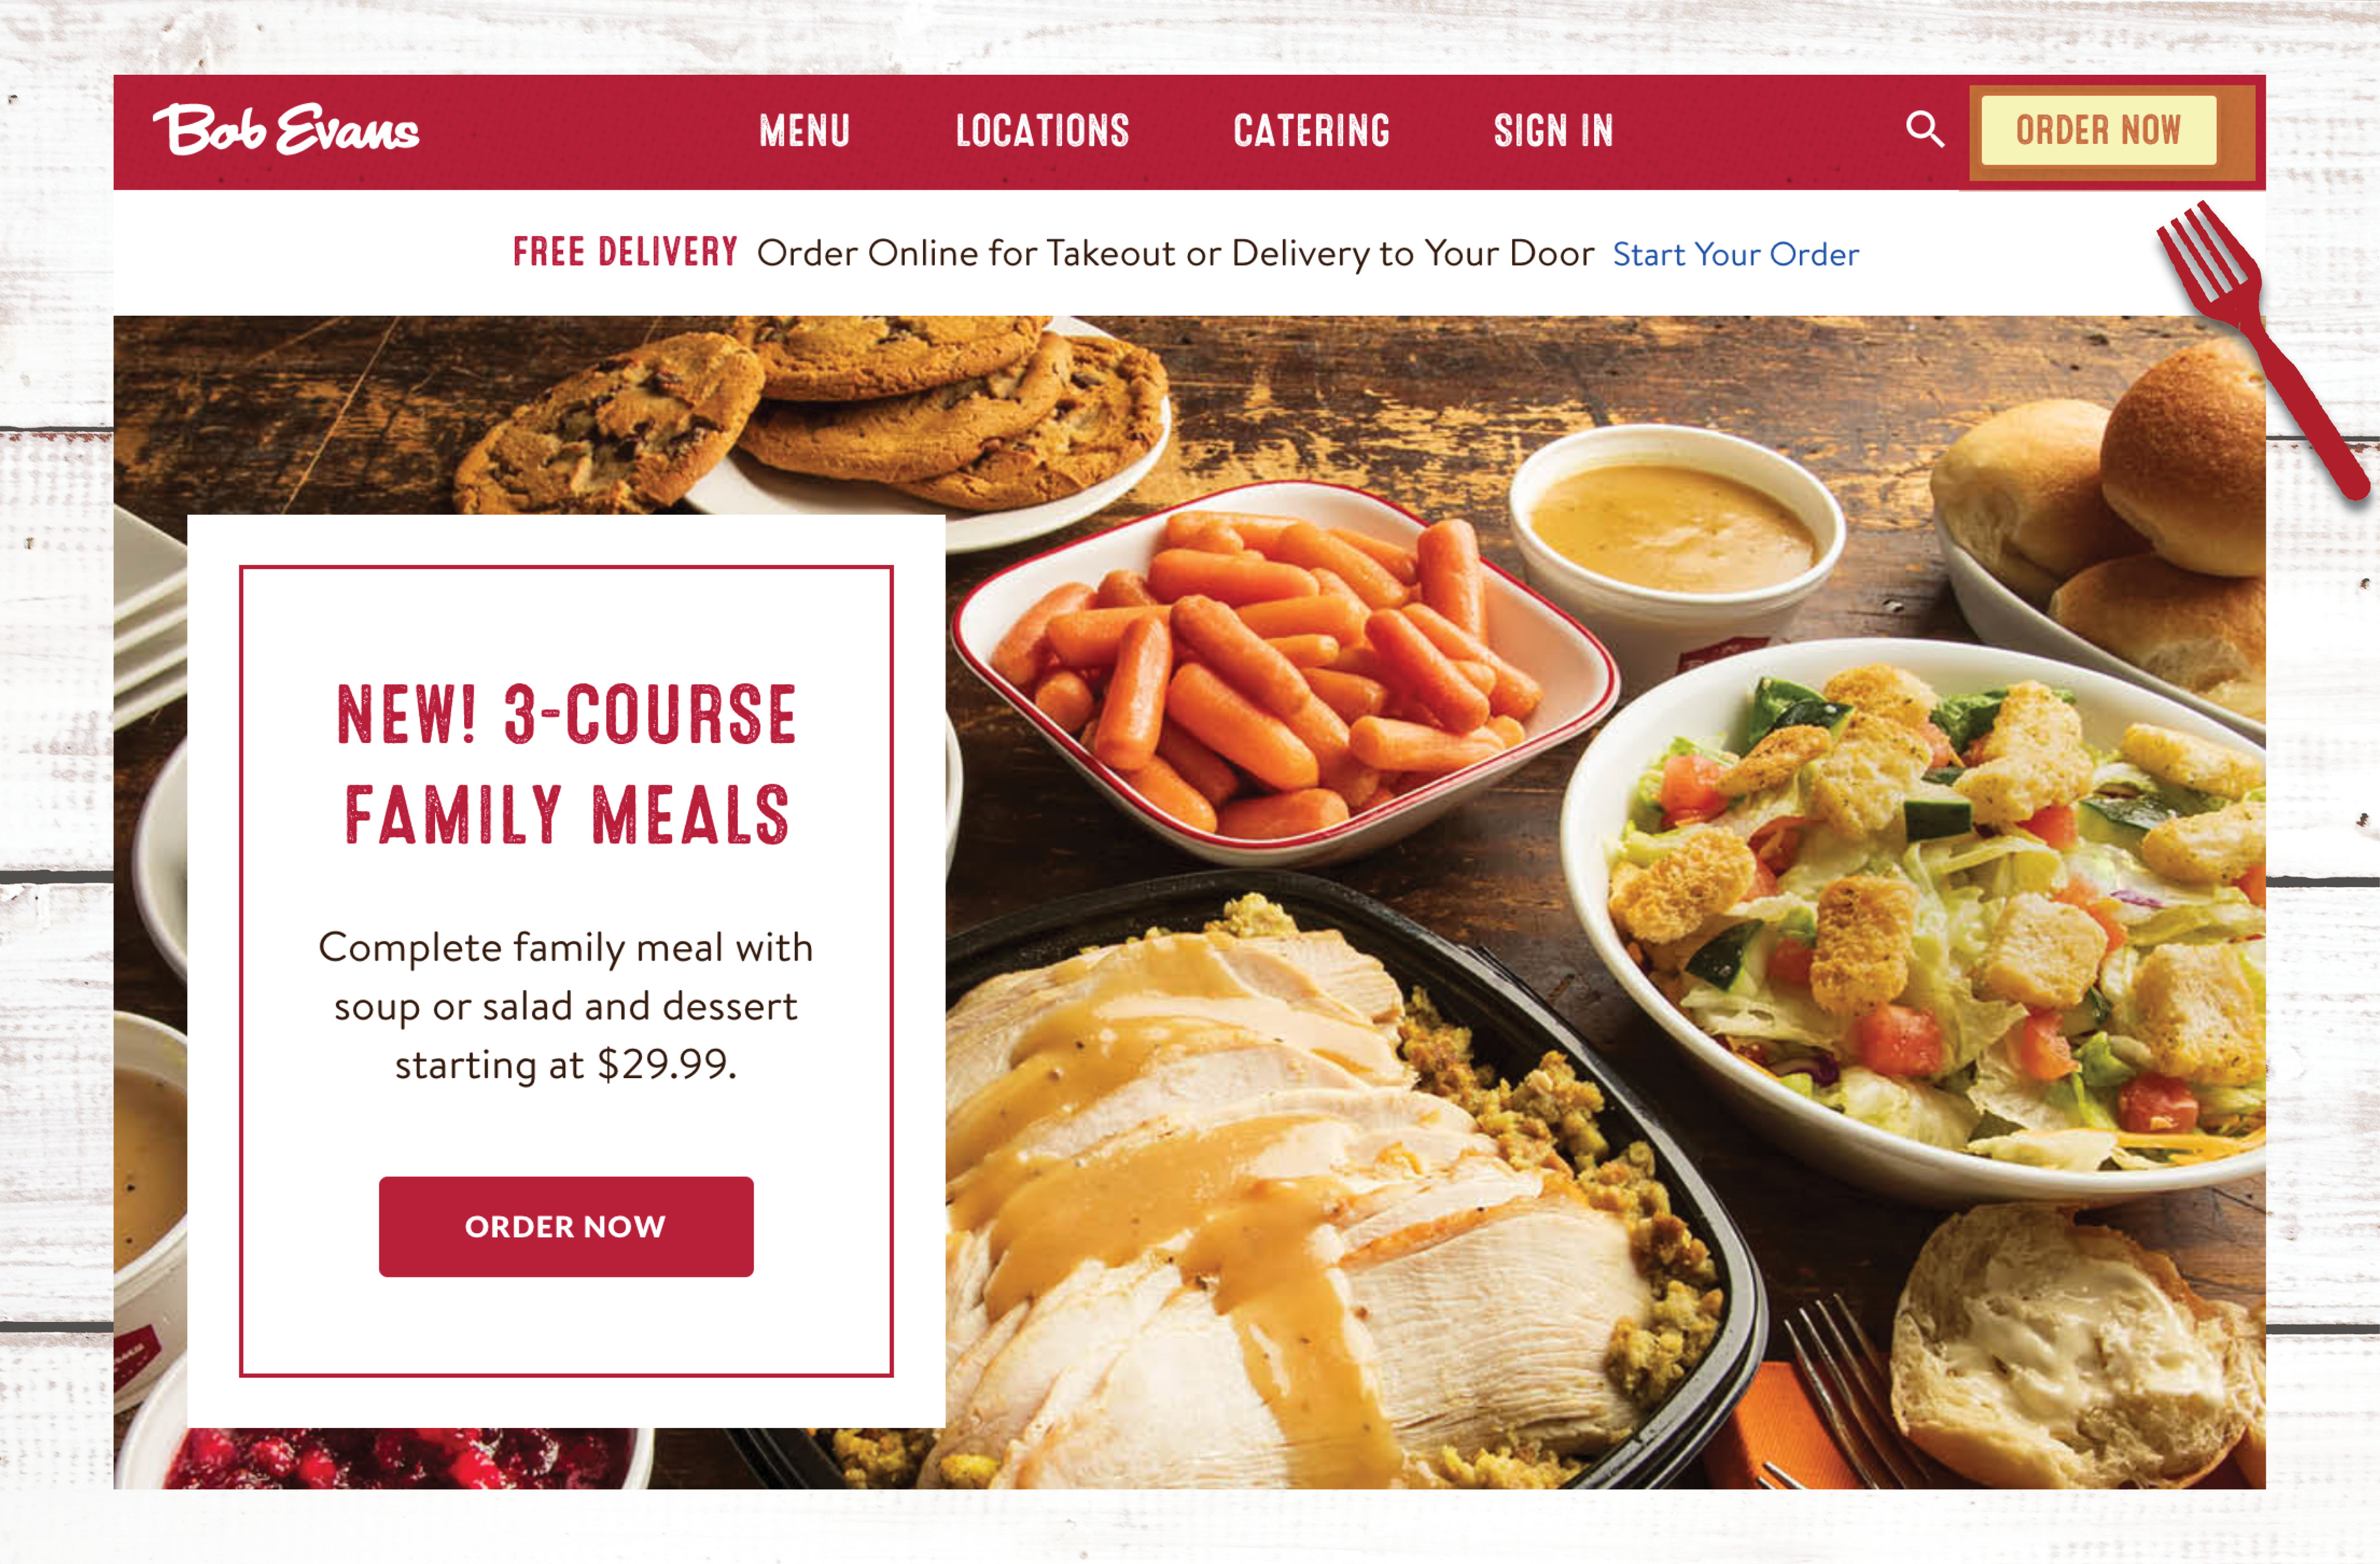 Bob Evans How To Order Curbside Pickup Takeout Or Delivery From Bob Evans Online